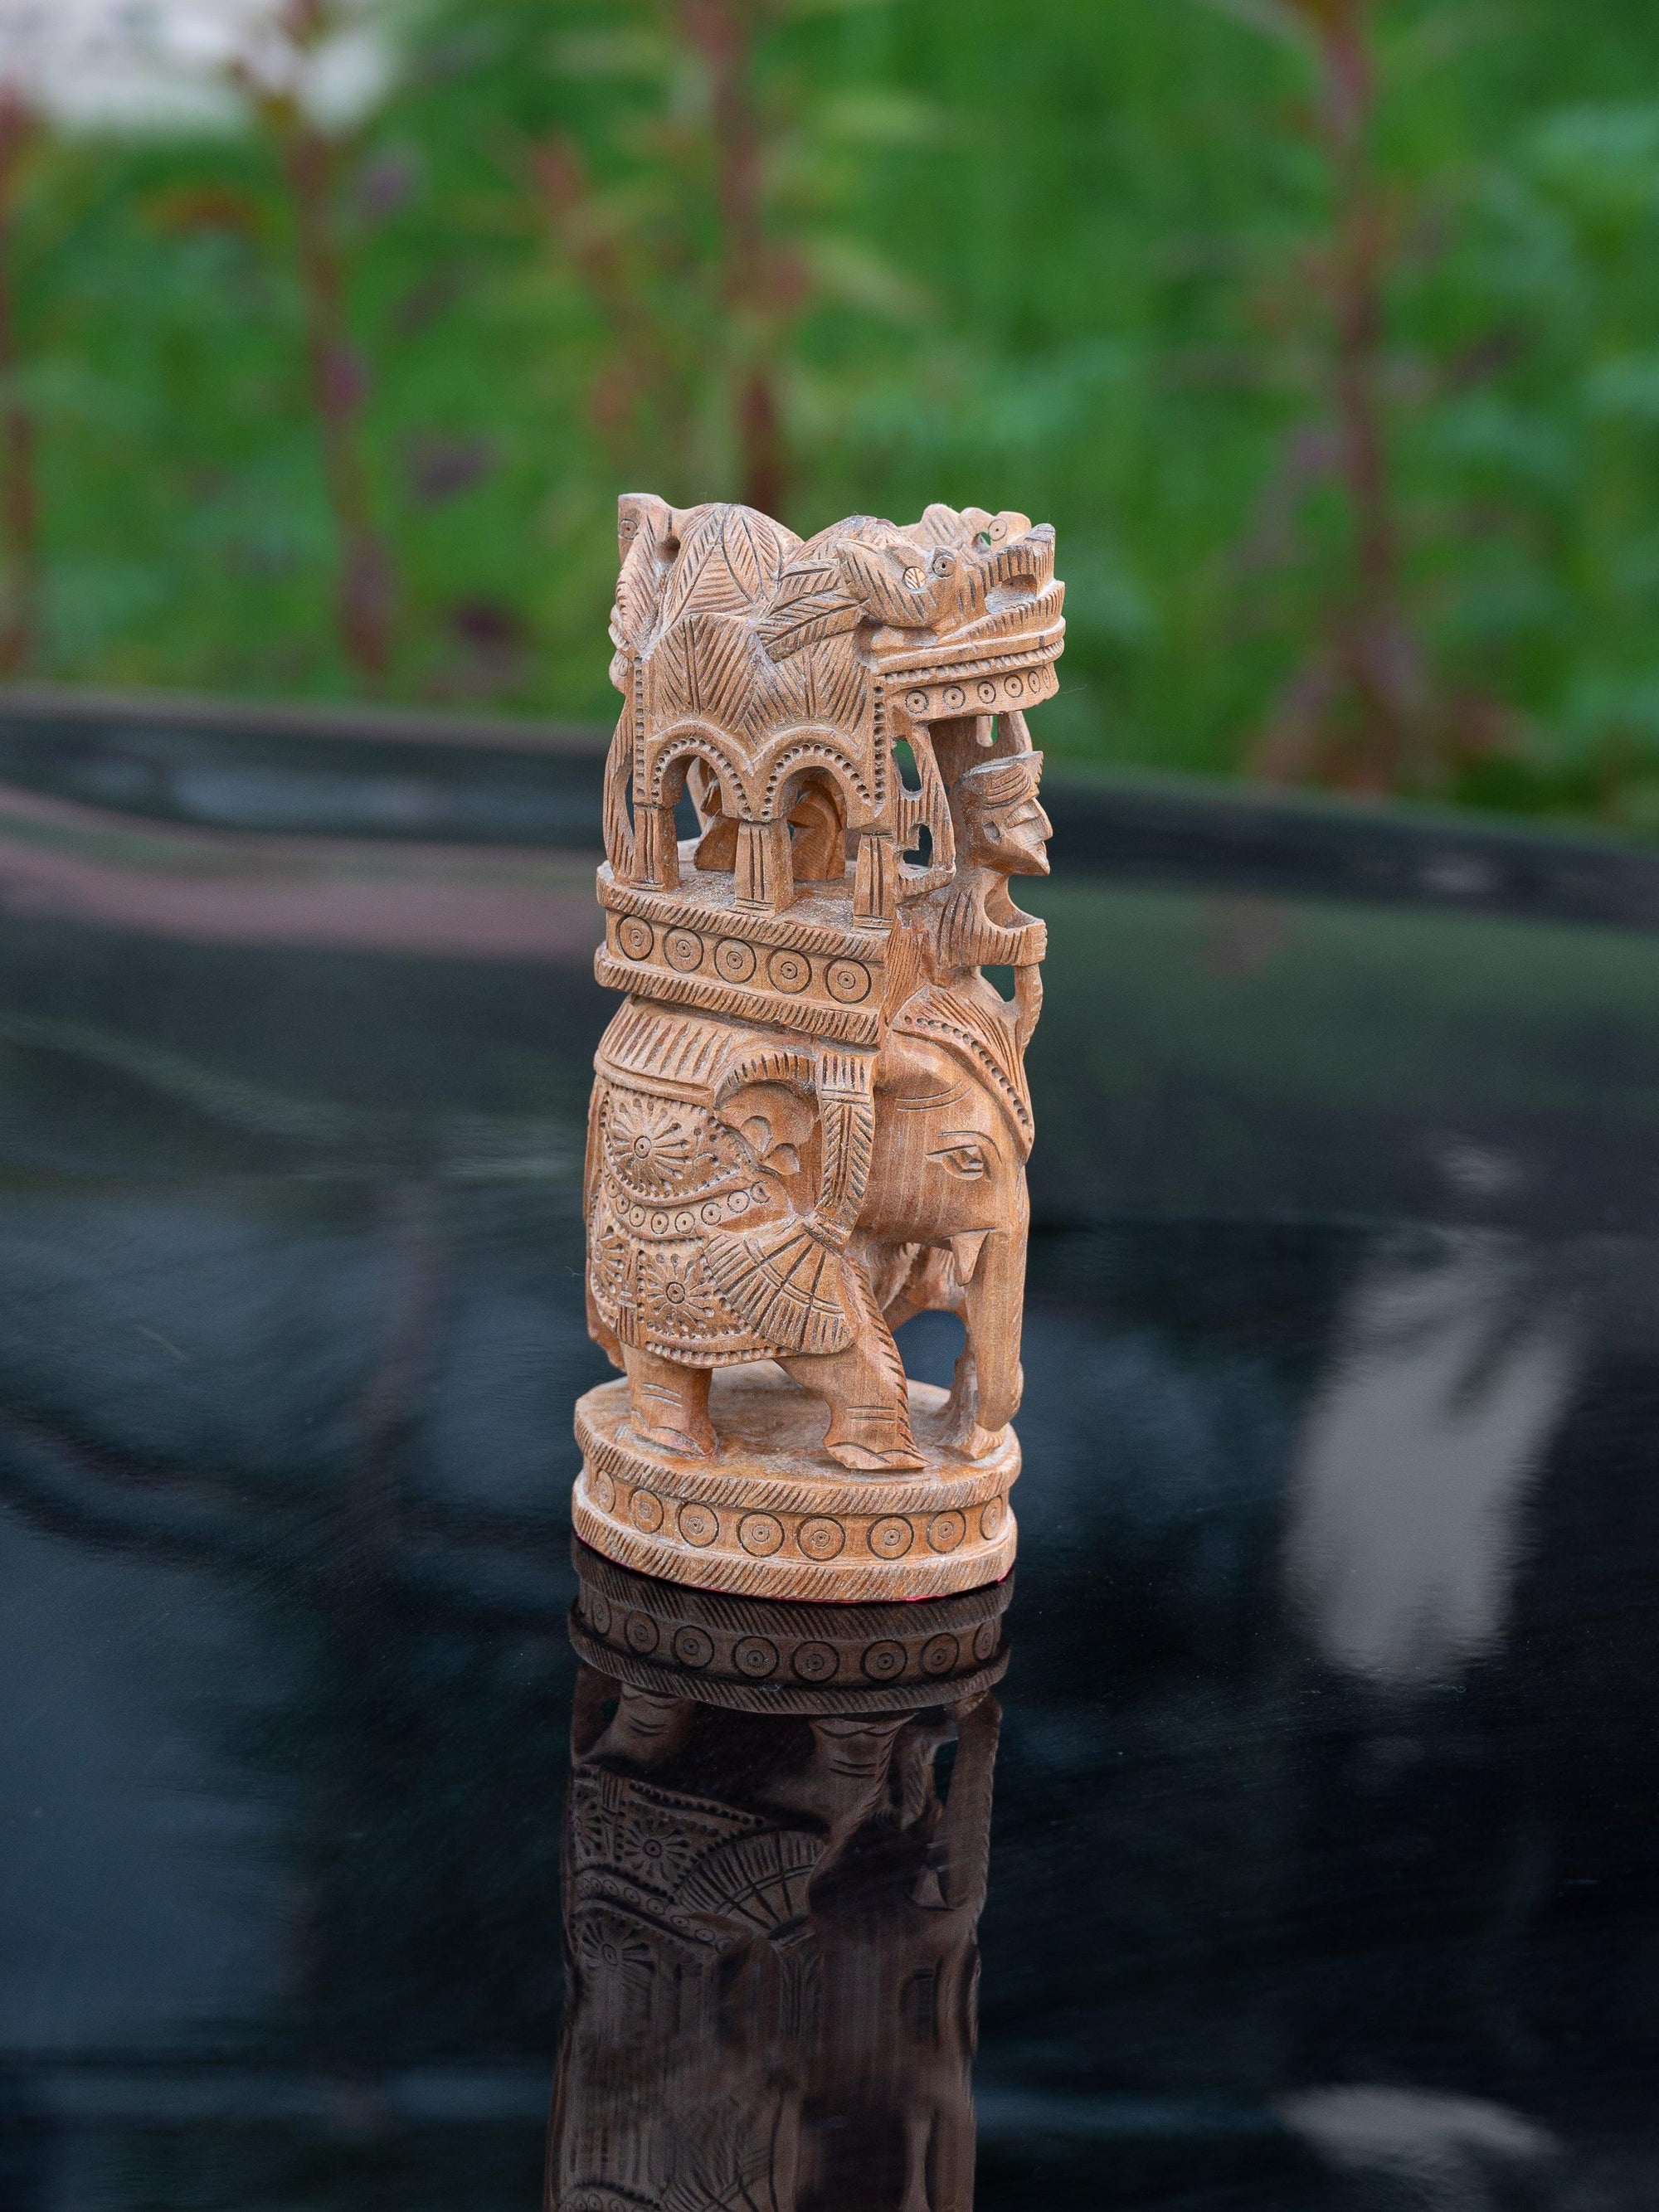 Ambabari Elephant crafted on Kadam wood - 8 inches in height - The Heritage Artifacts